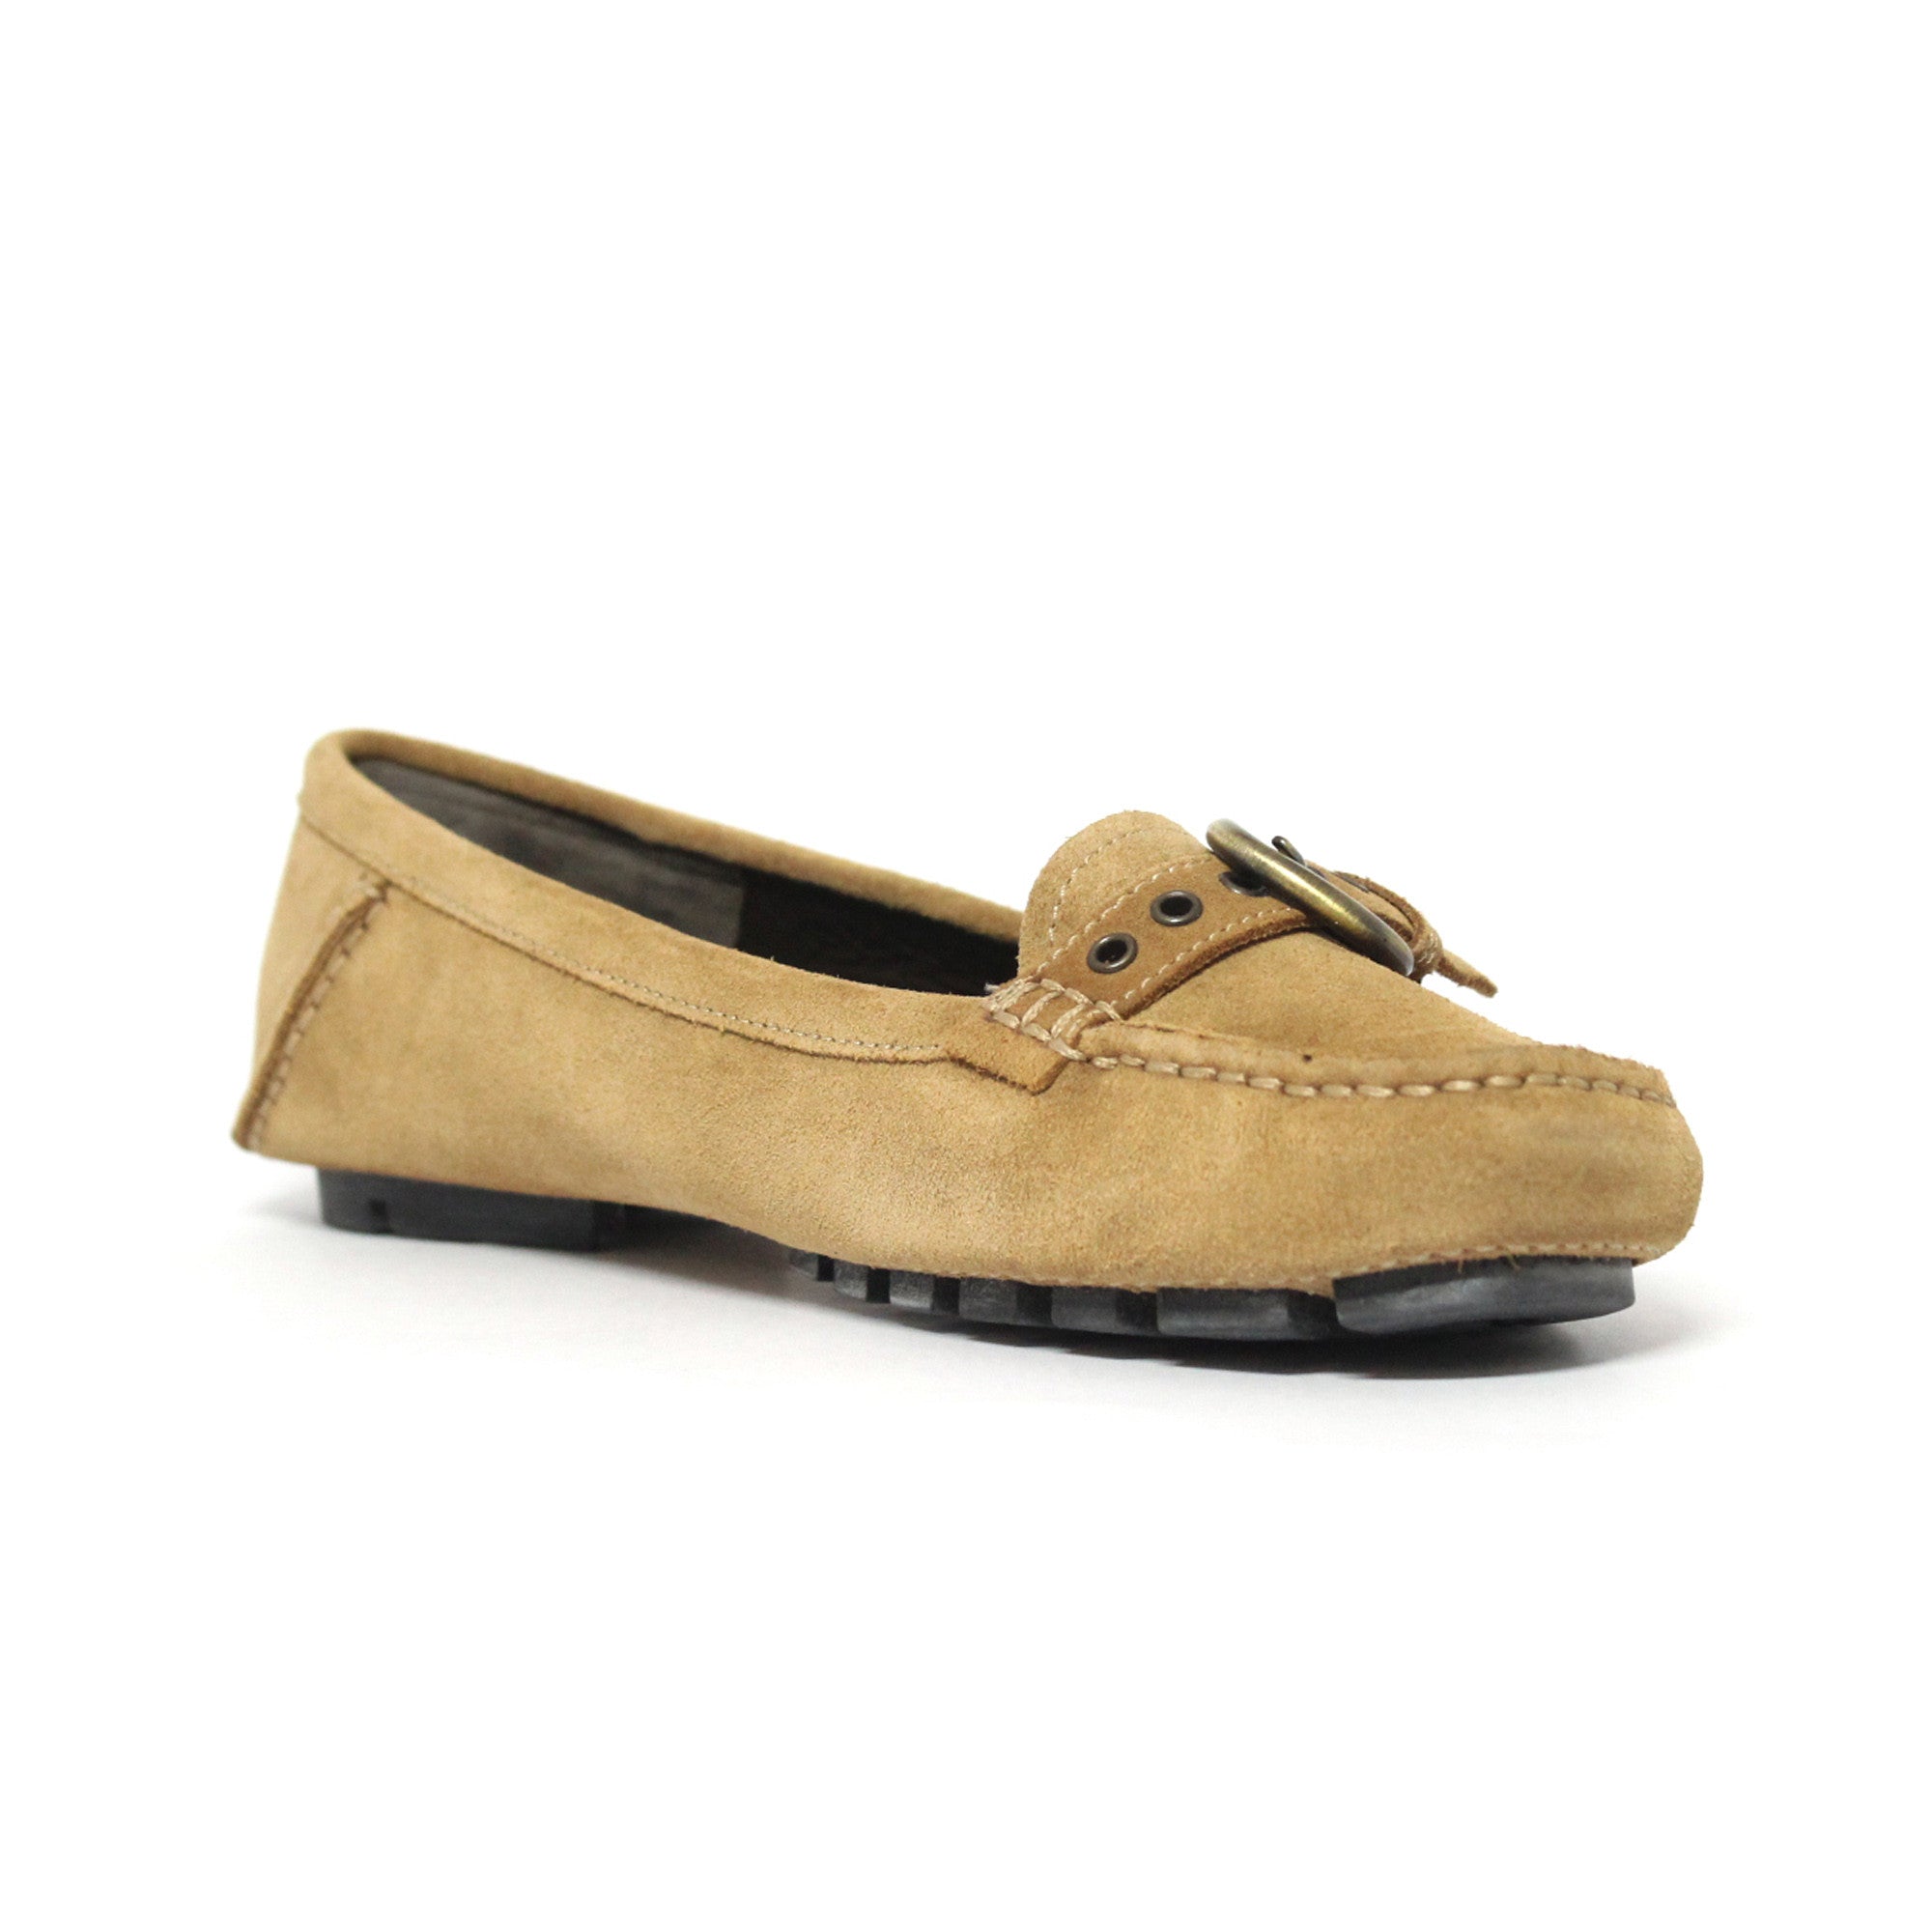 Bally Dorialla Womens Suede Driving Shoes